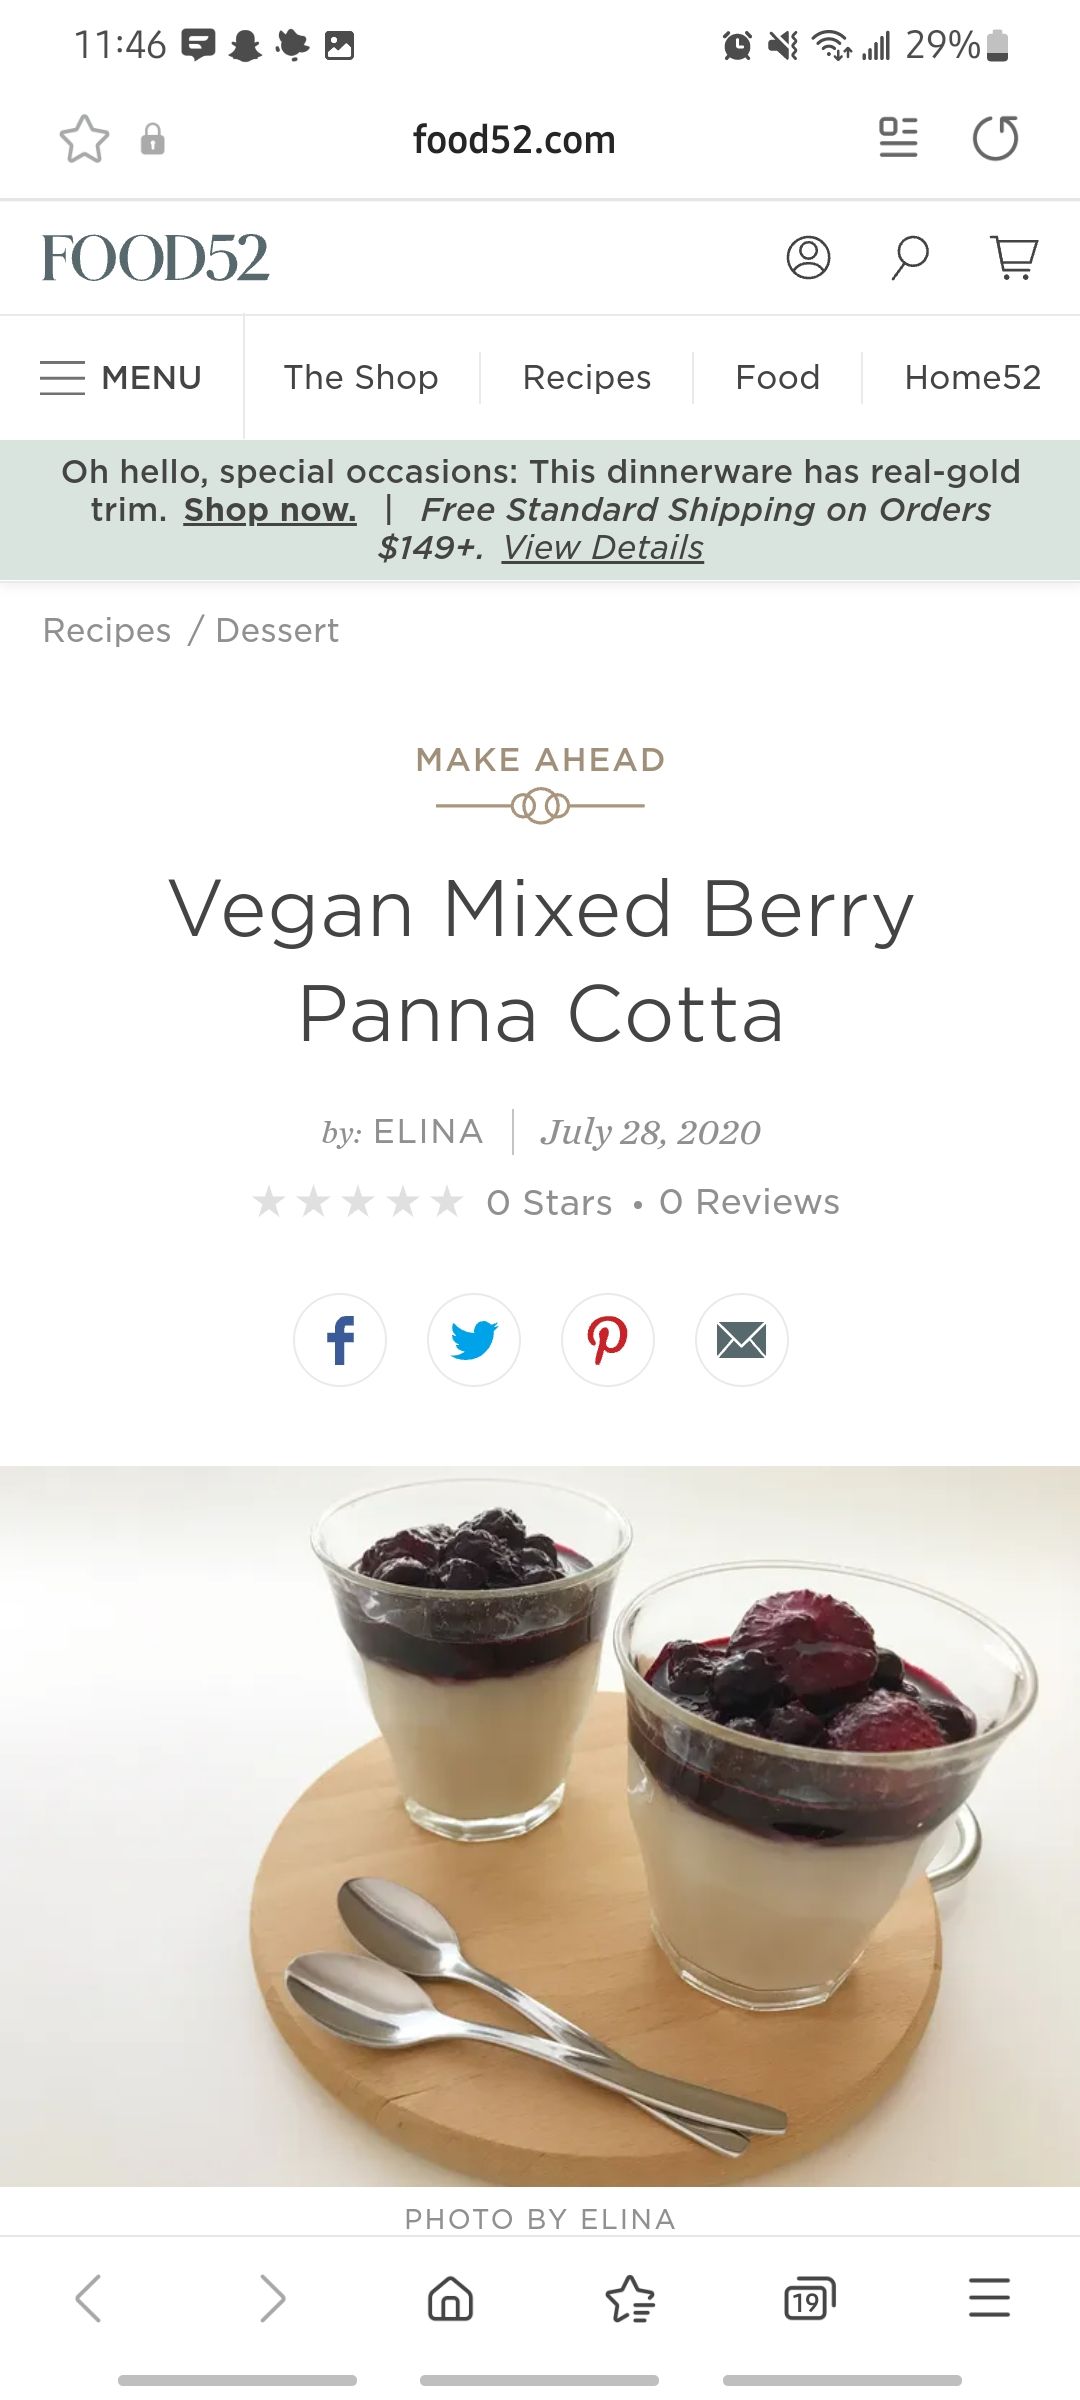 recipe for vegan mixed berry panna cotta on food52's website